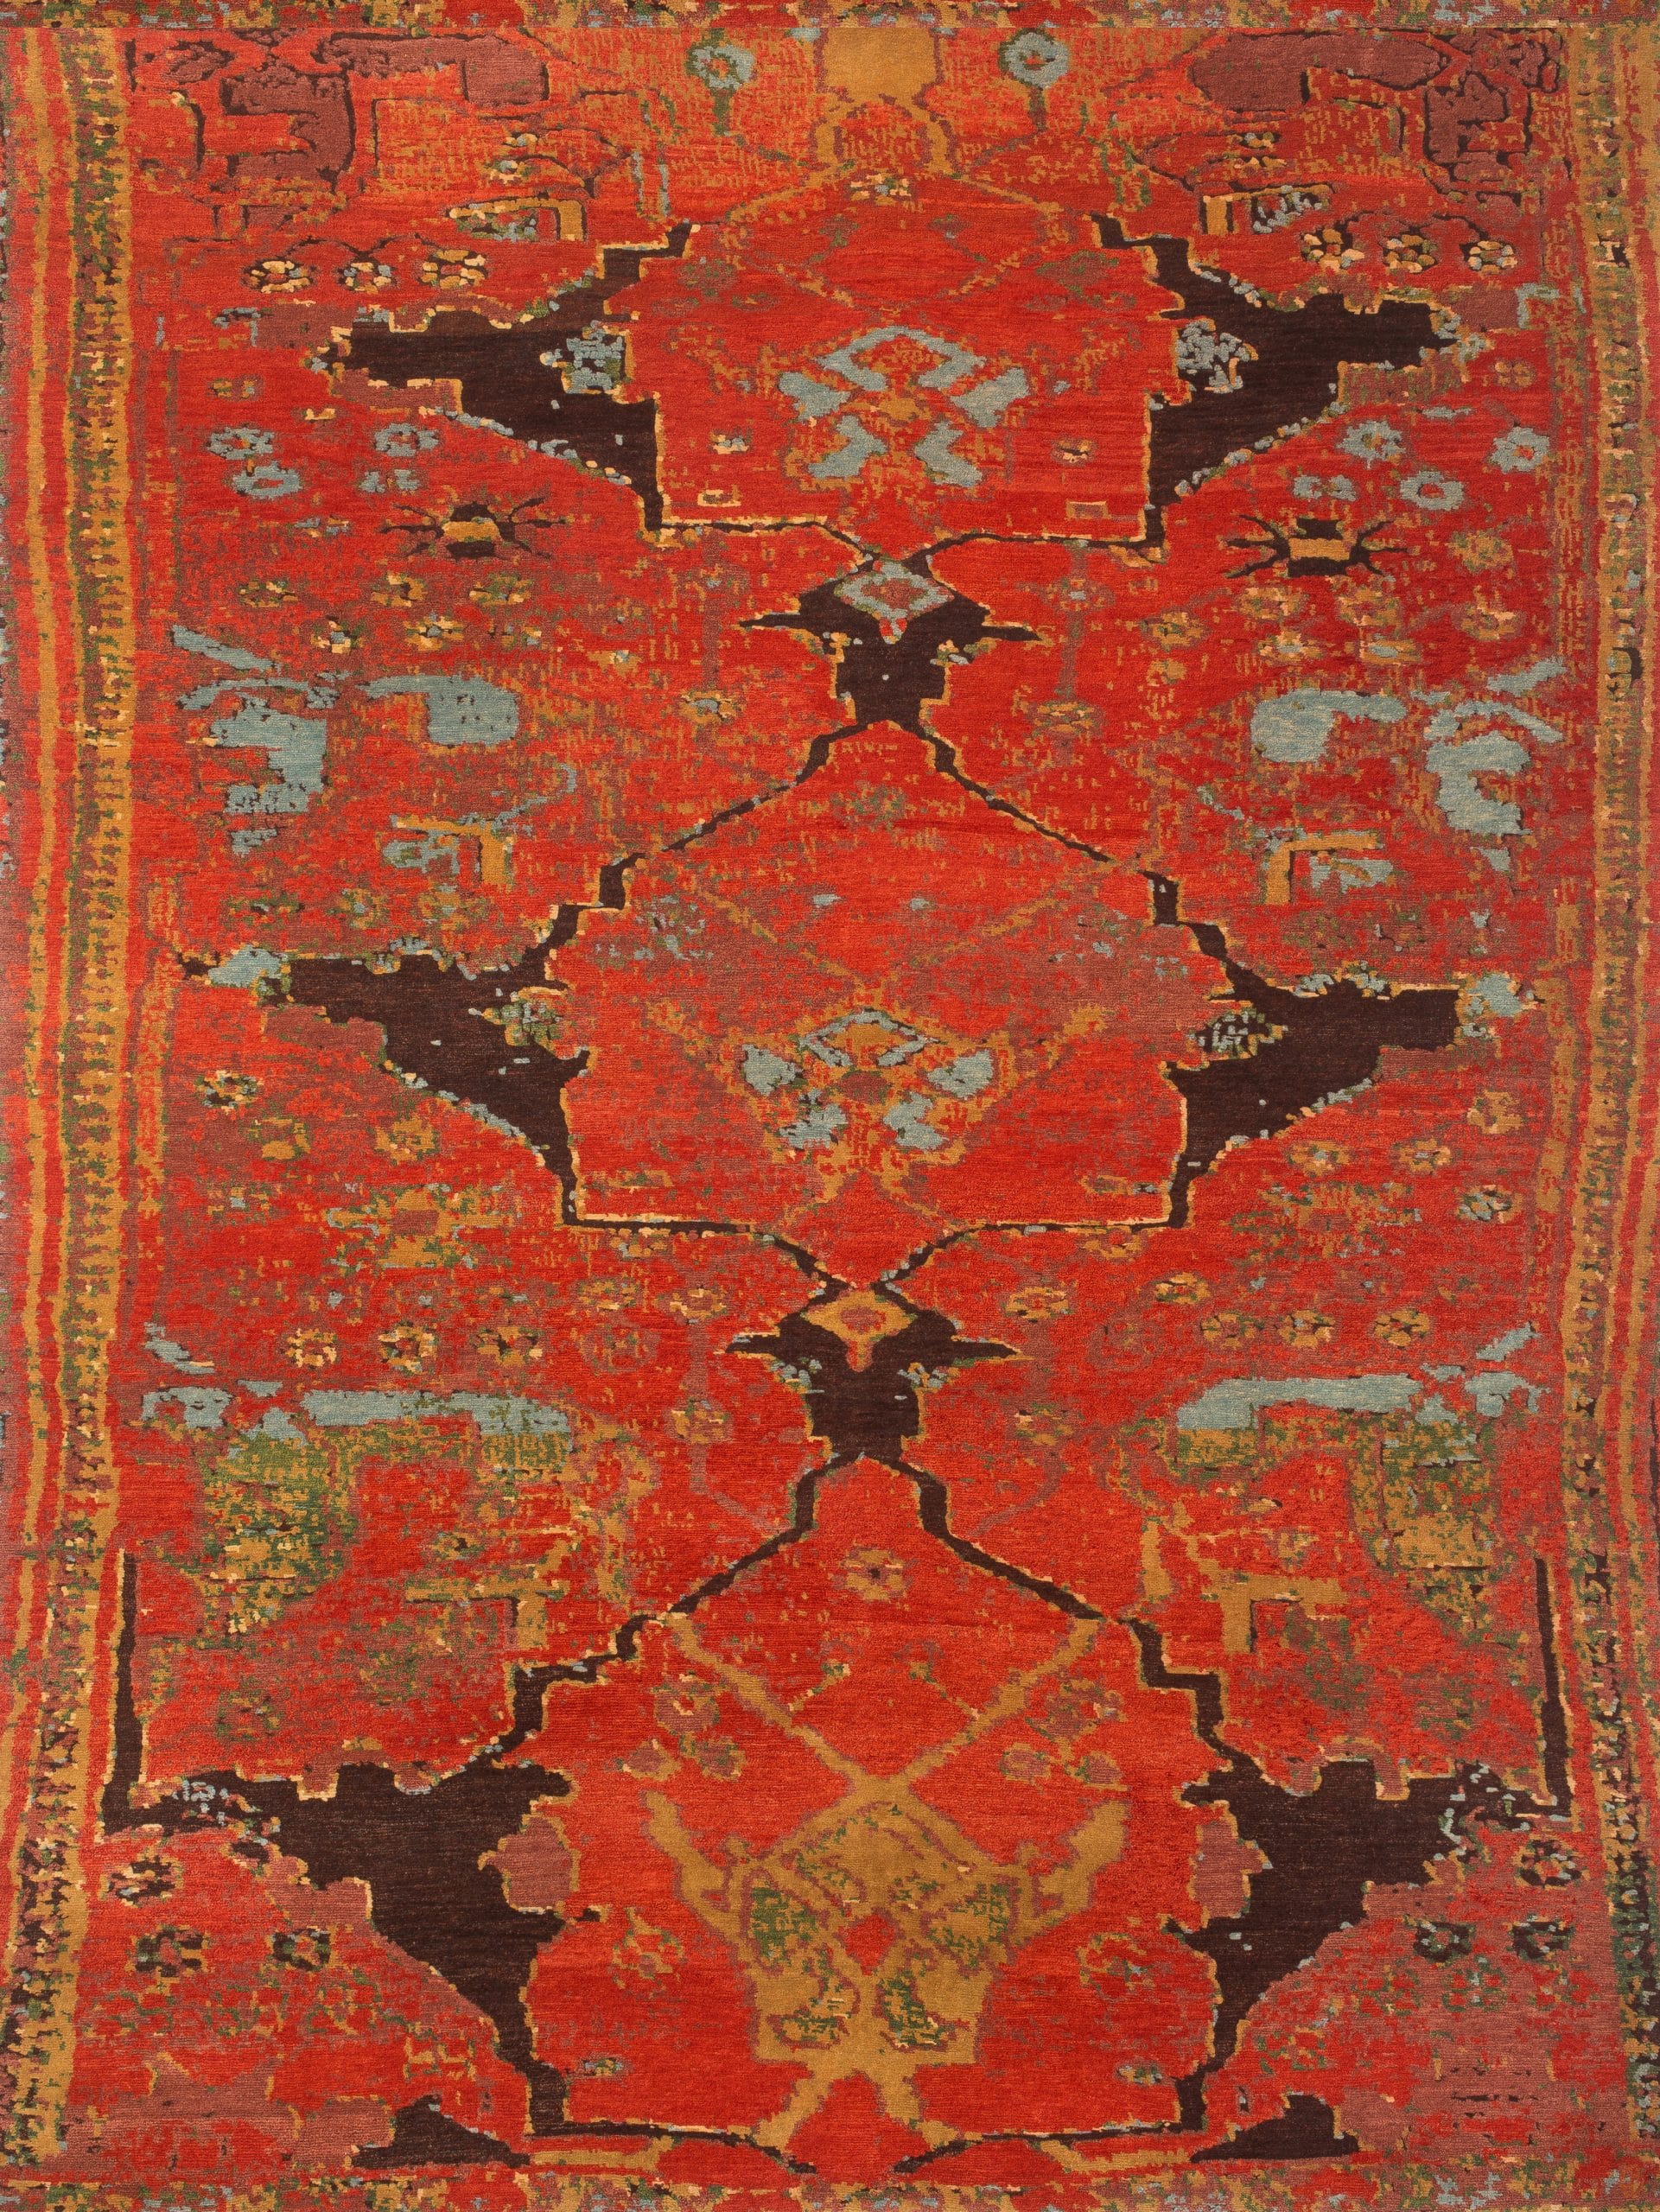 Geba carpet "Bidjar" inspired by a traditional texile, red-blue-black and beige-green border, relief cut and vintage look, from Nepal, 100 knot, made of vegetable dyed sheep's wool - product picture - Geba carpet